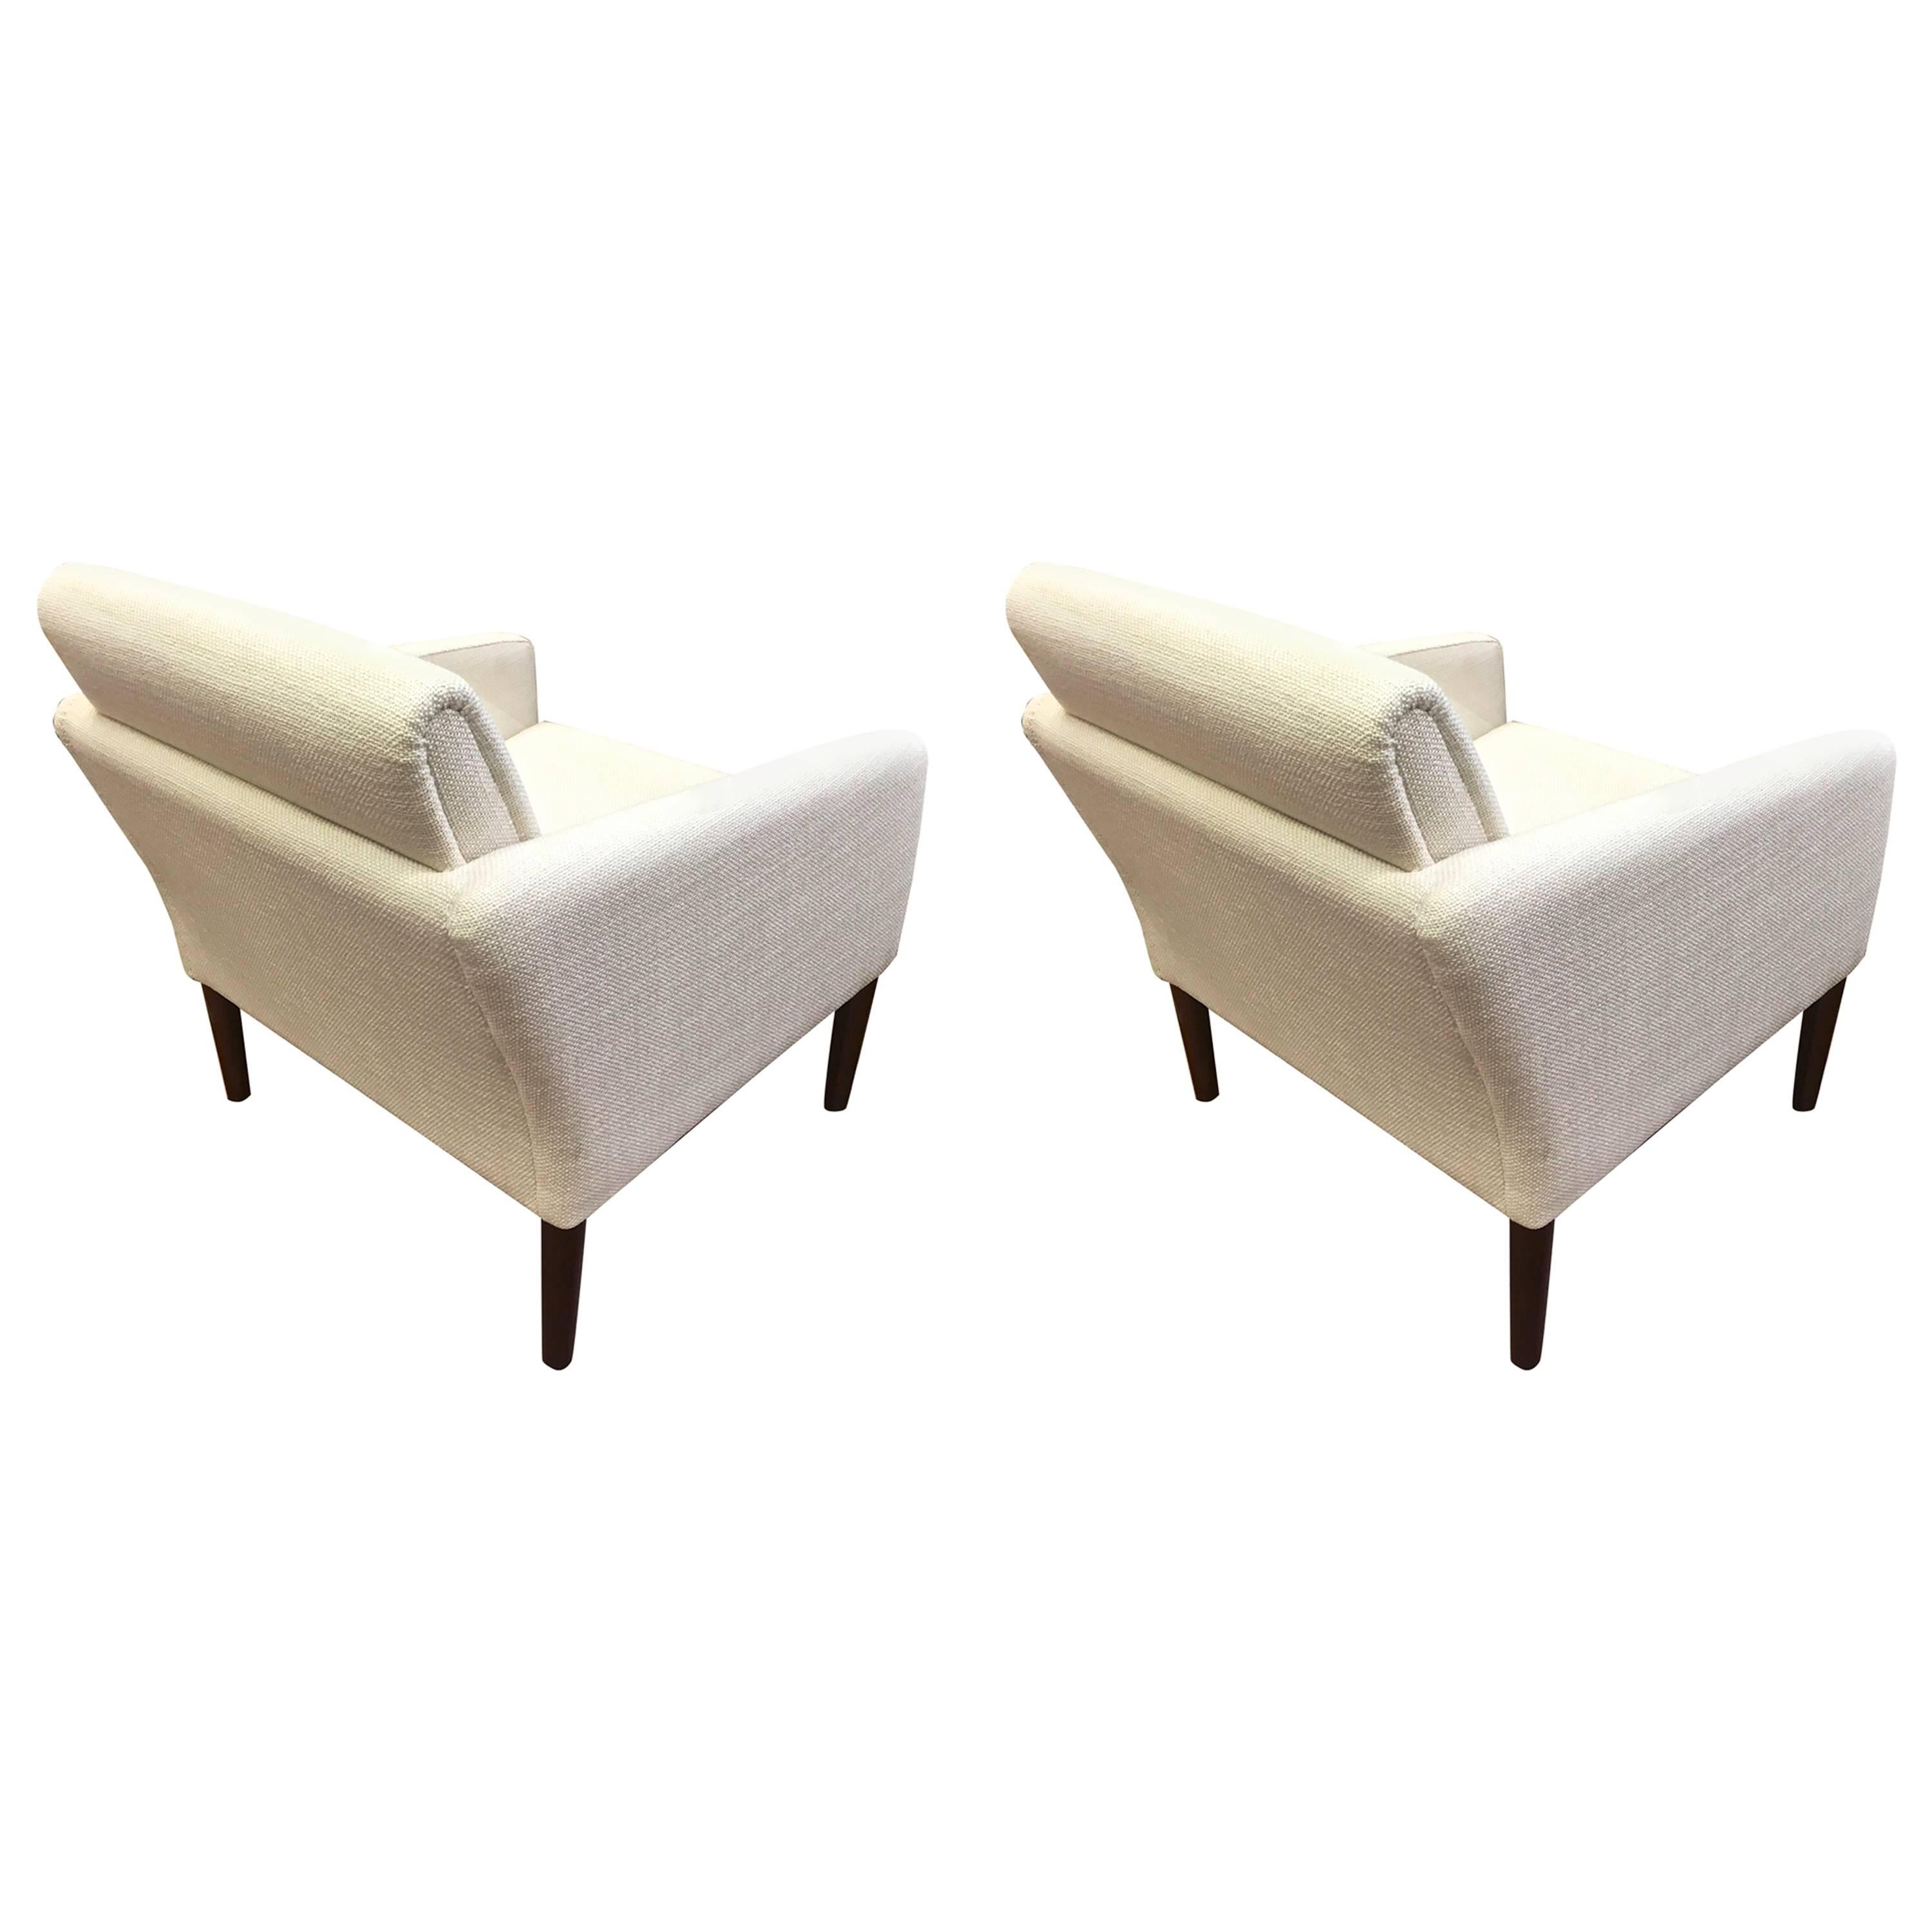 Danish Modernist Purest Design Pair of Chair Newly Covered in Canvas Cloth For Sale